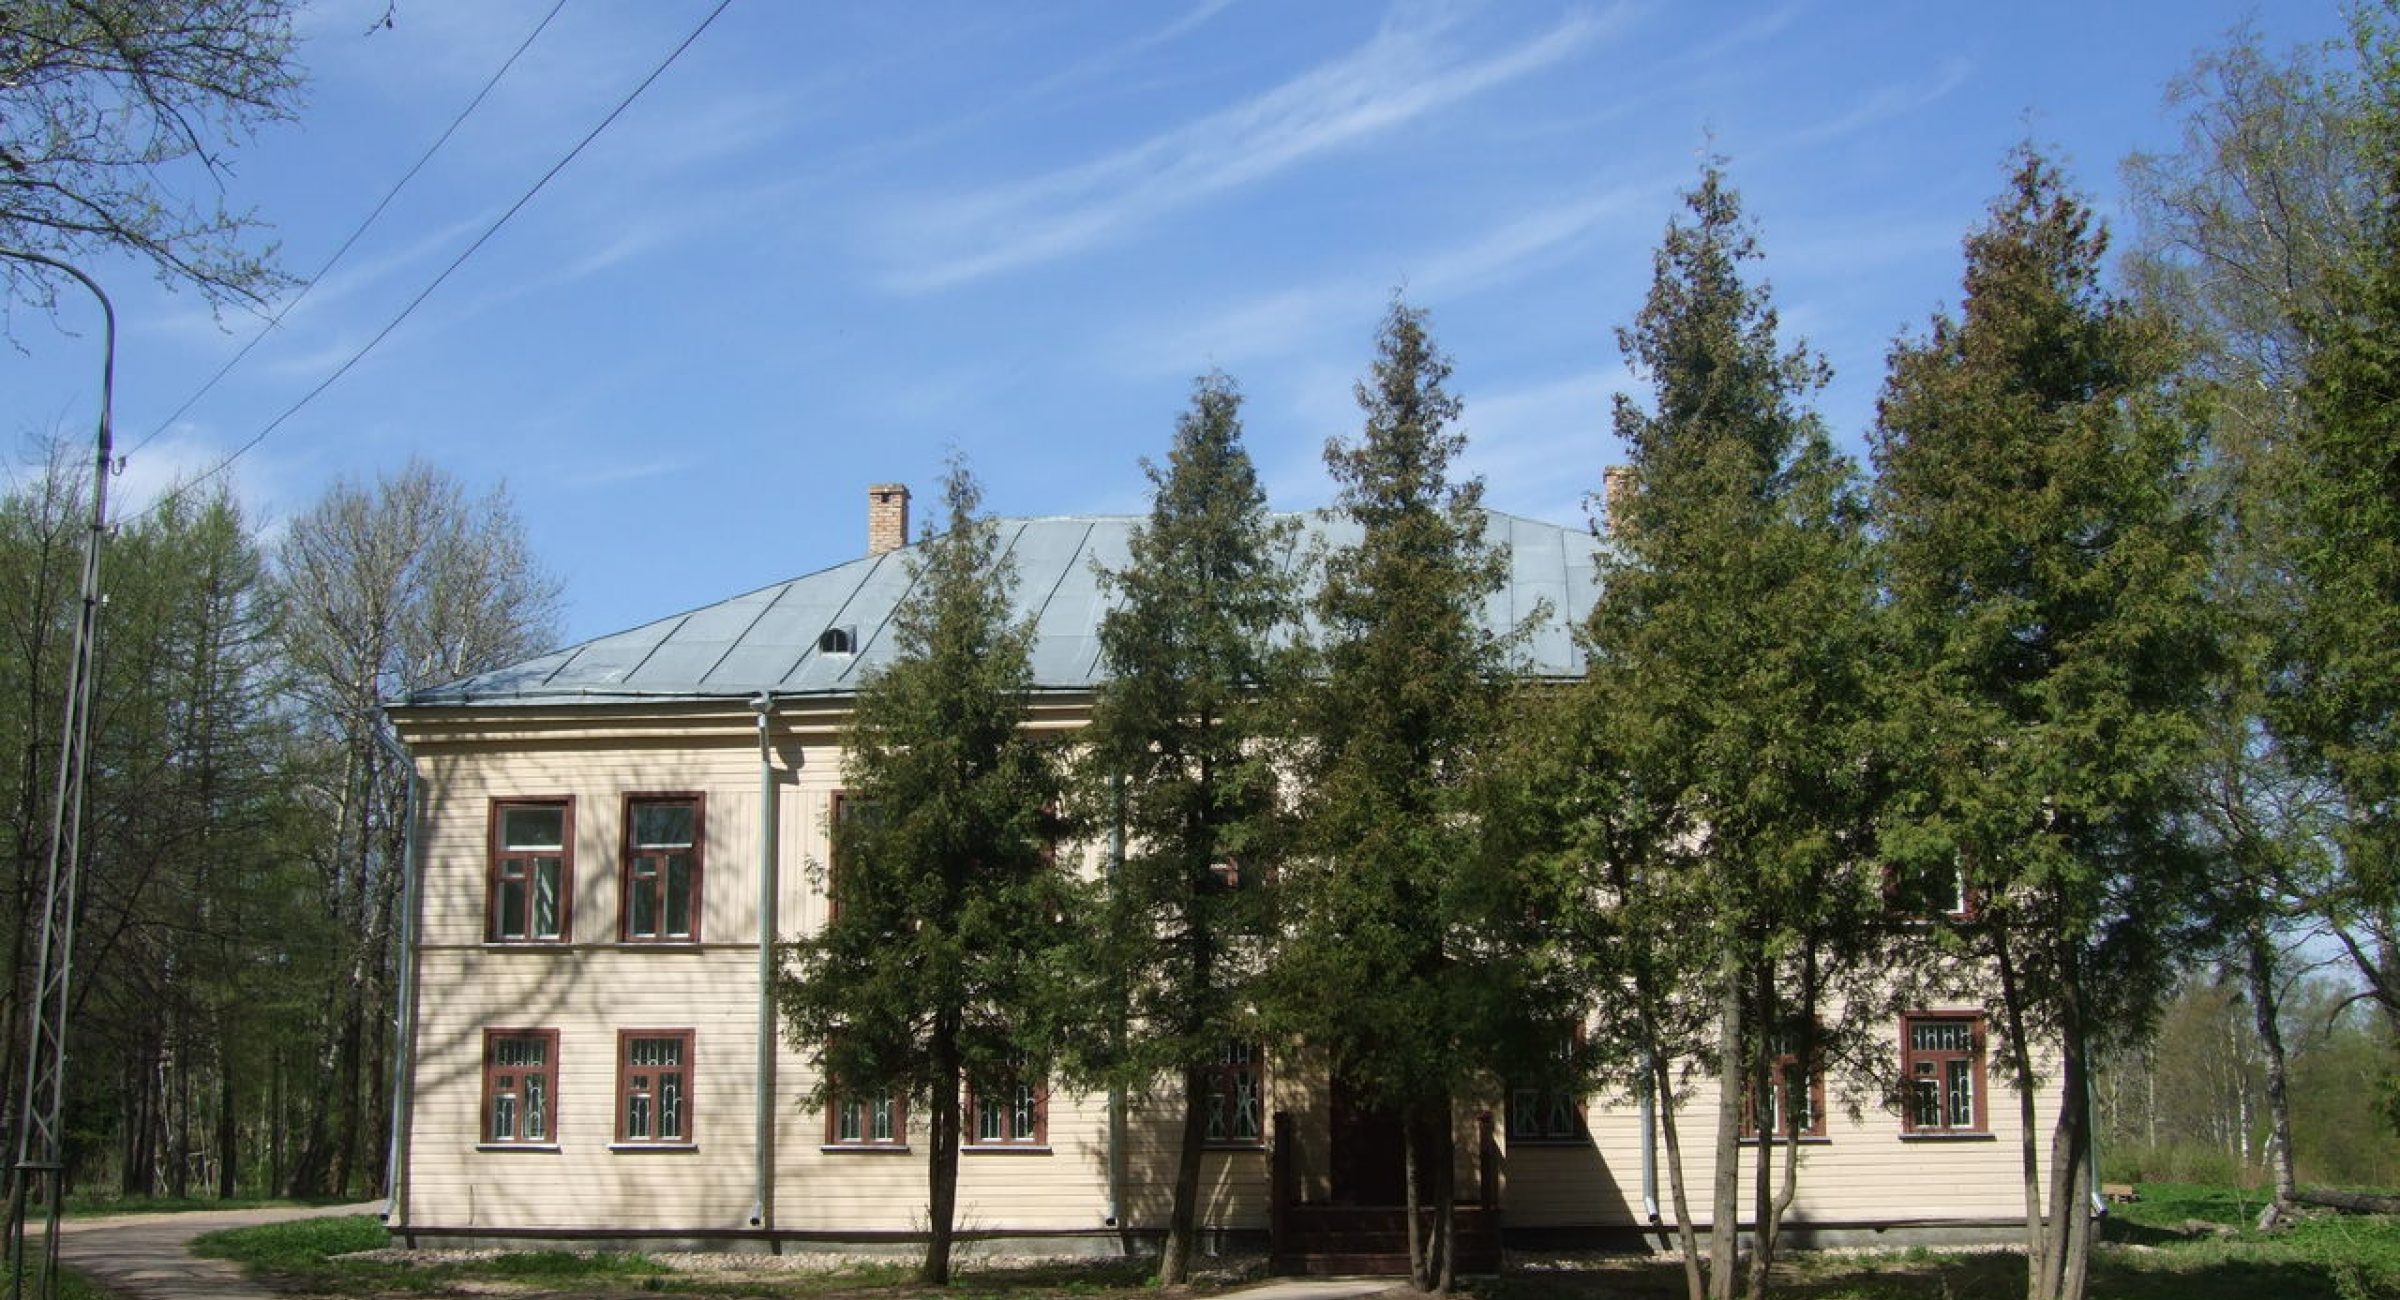 The city park of Olonets and the Olonets national museum of Southern Karelians